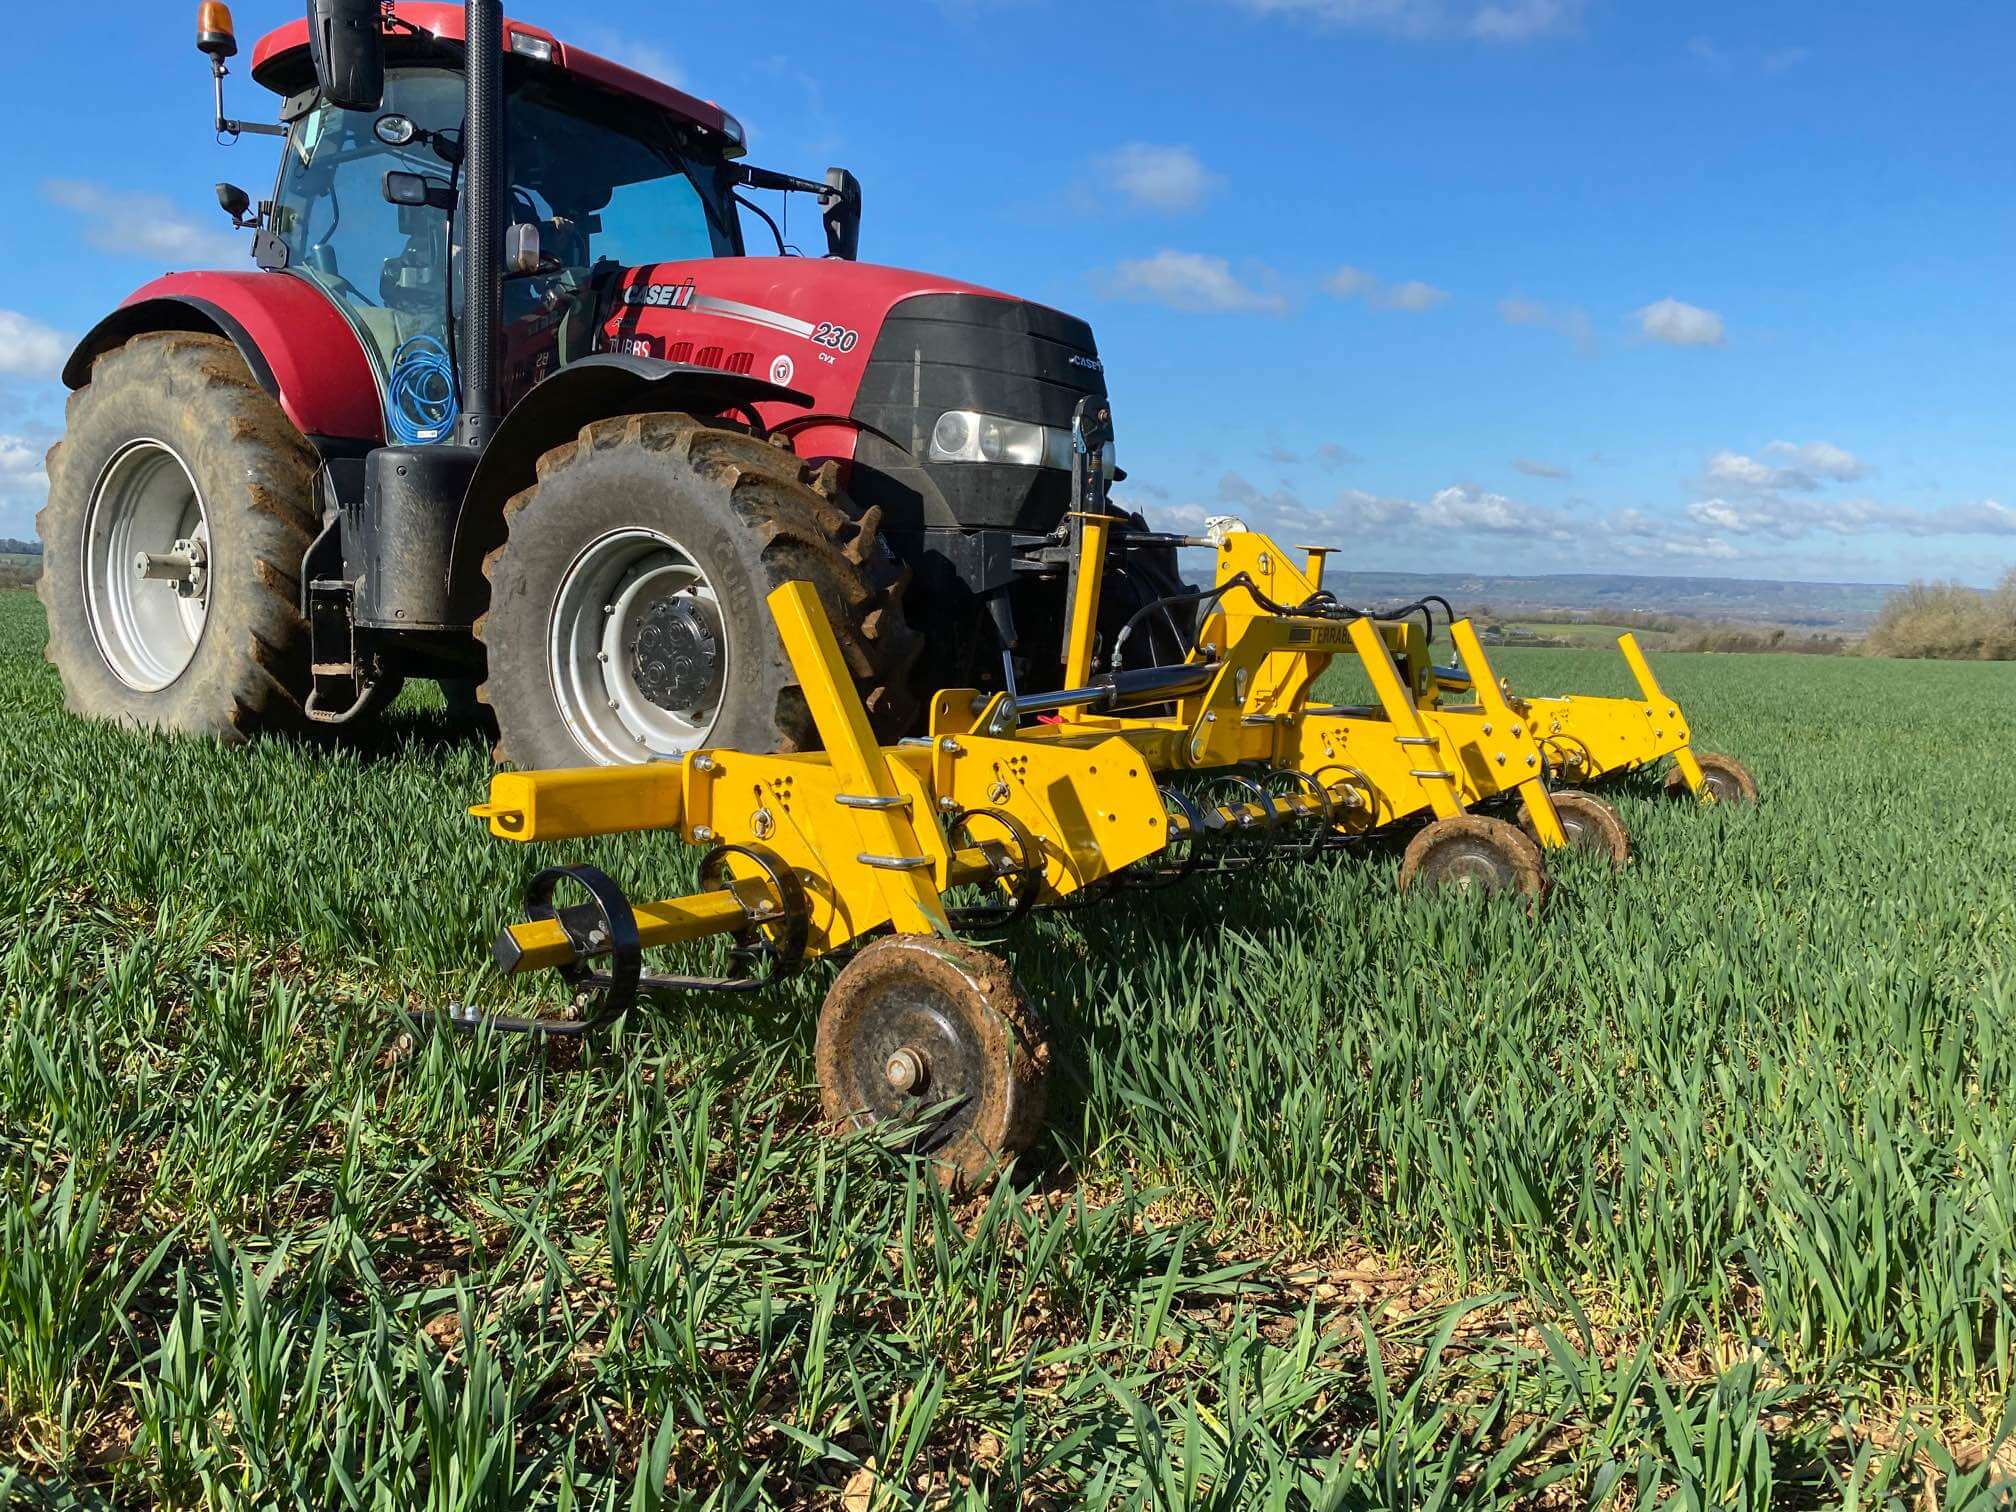 TerraBlade inter-row hoe is in operation on the farm